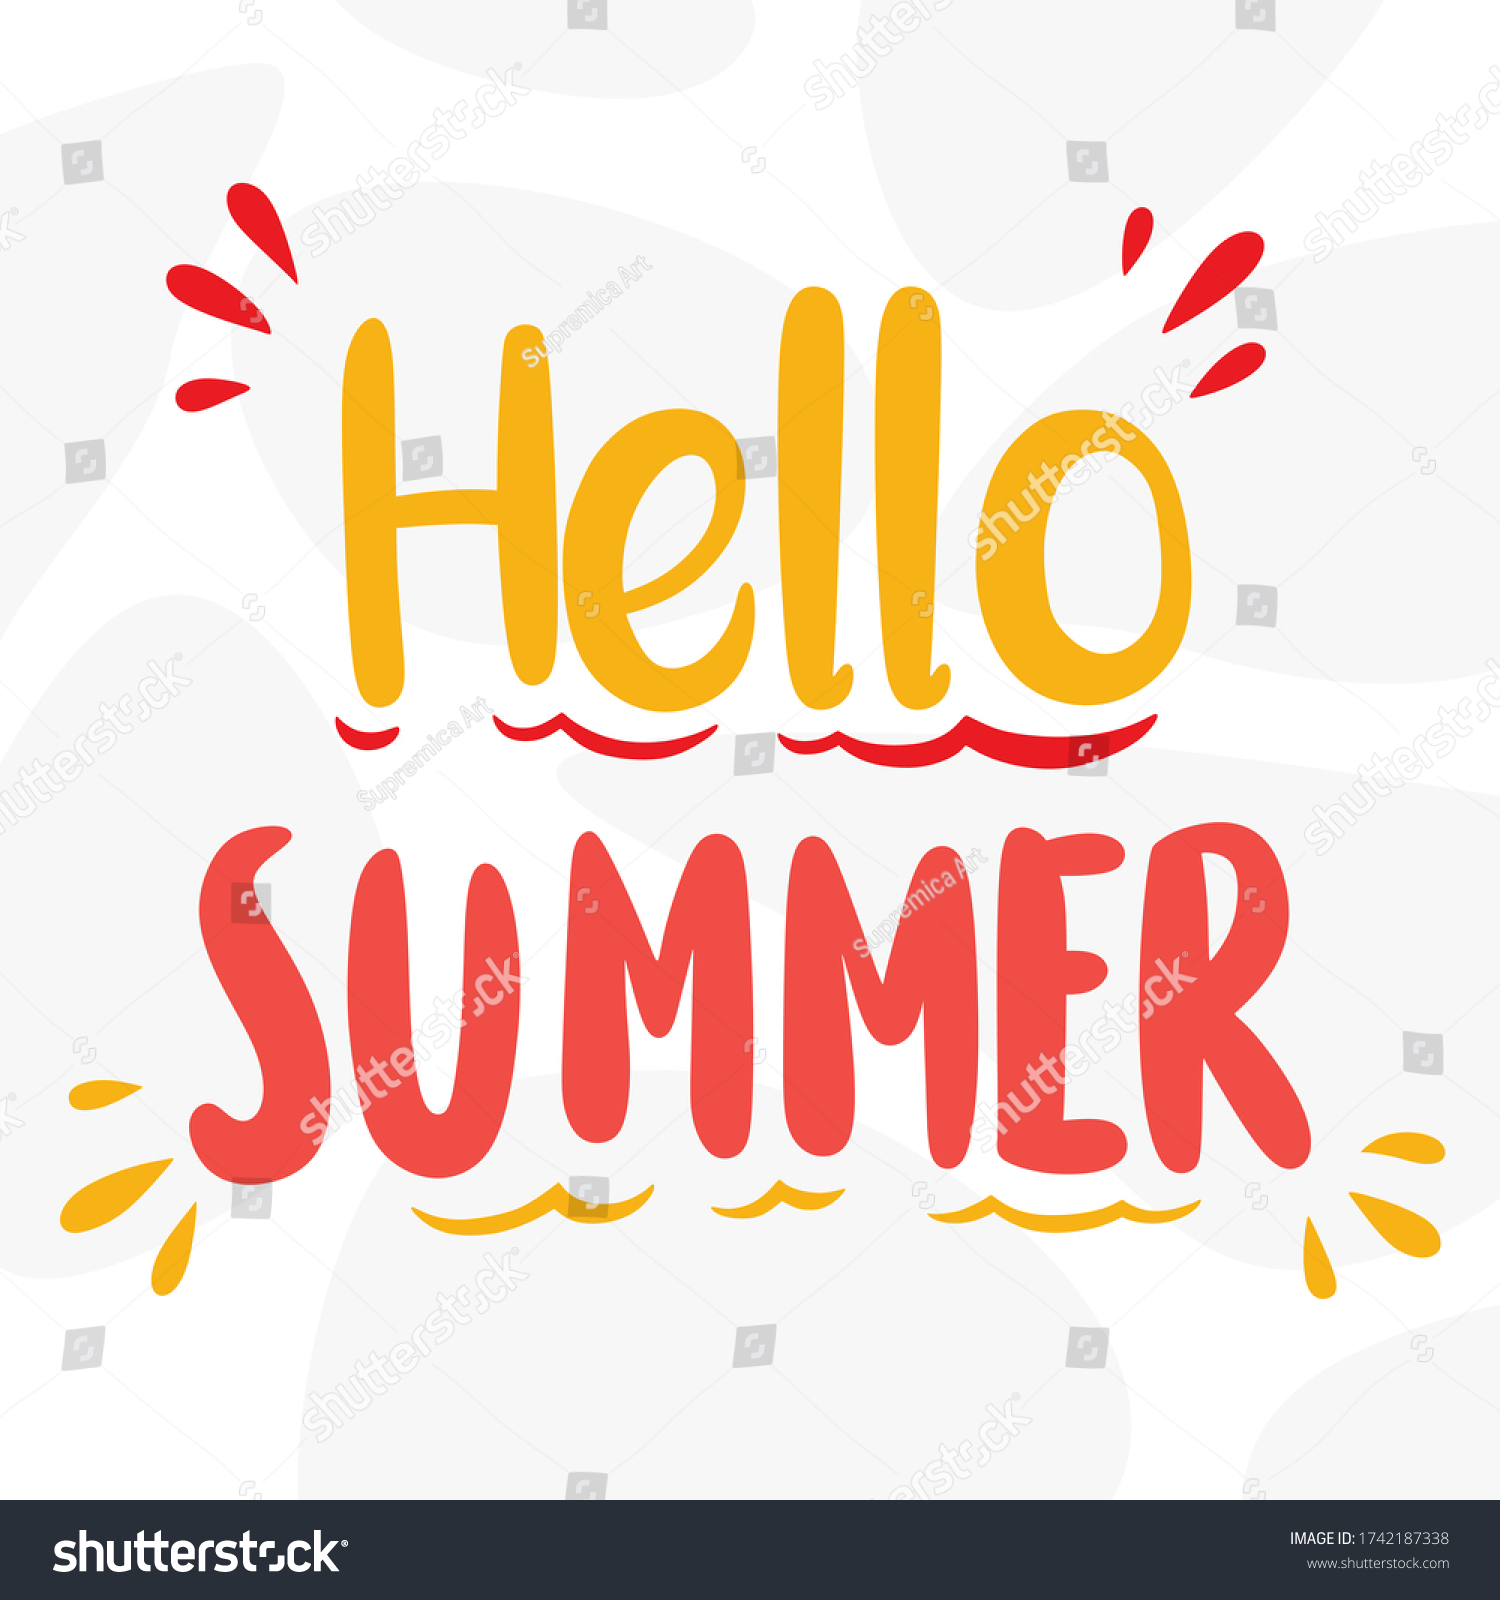 SVG of Hello summer quotes for designe t shirt, stikers, svg silhouette, Vector illustration for social media, summer time hand draw letter svg